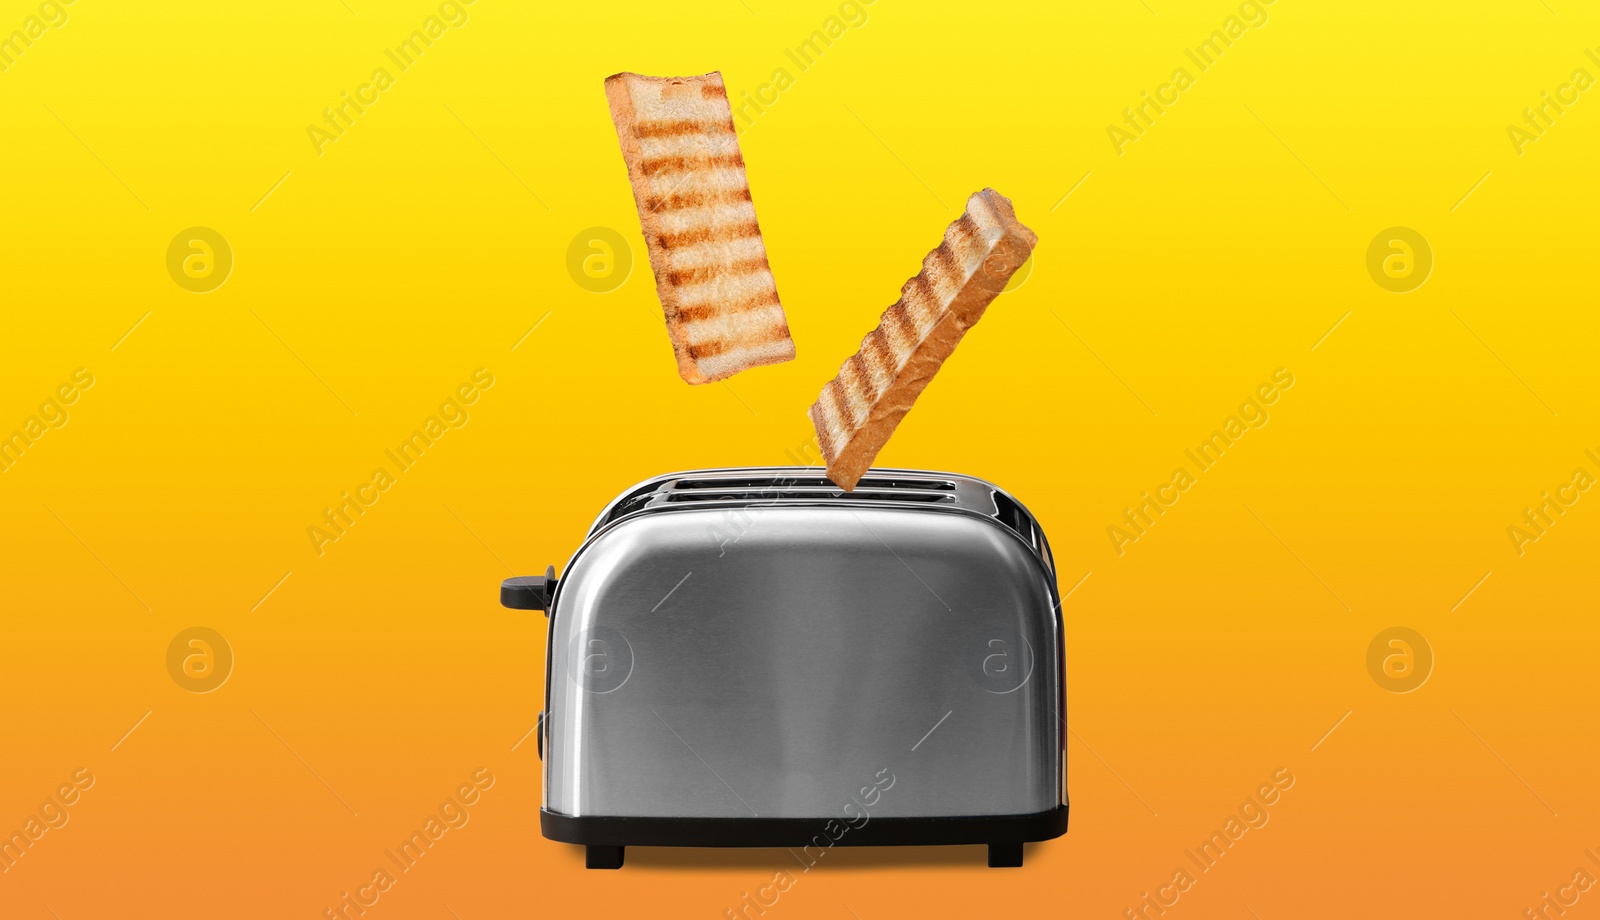 Image of Slices of grilled wheat bread flying out of toaster on color background 